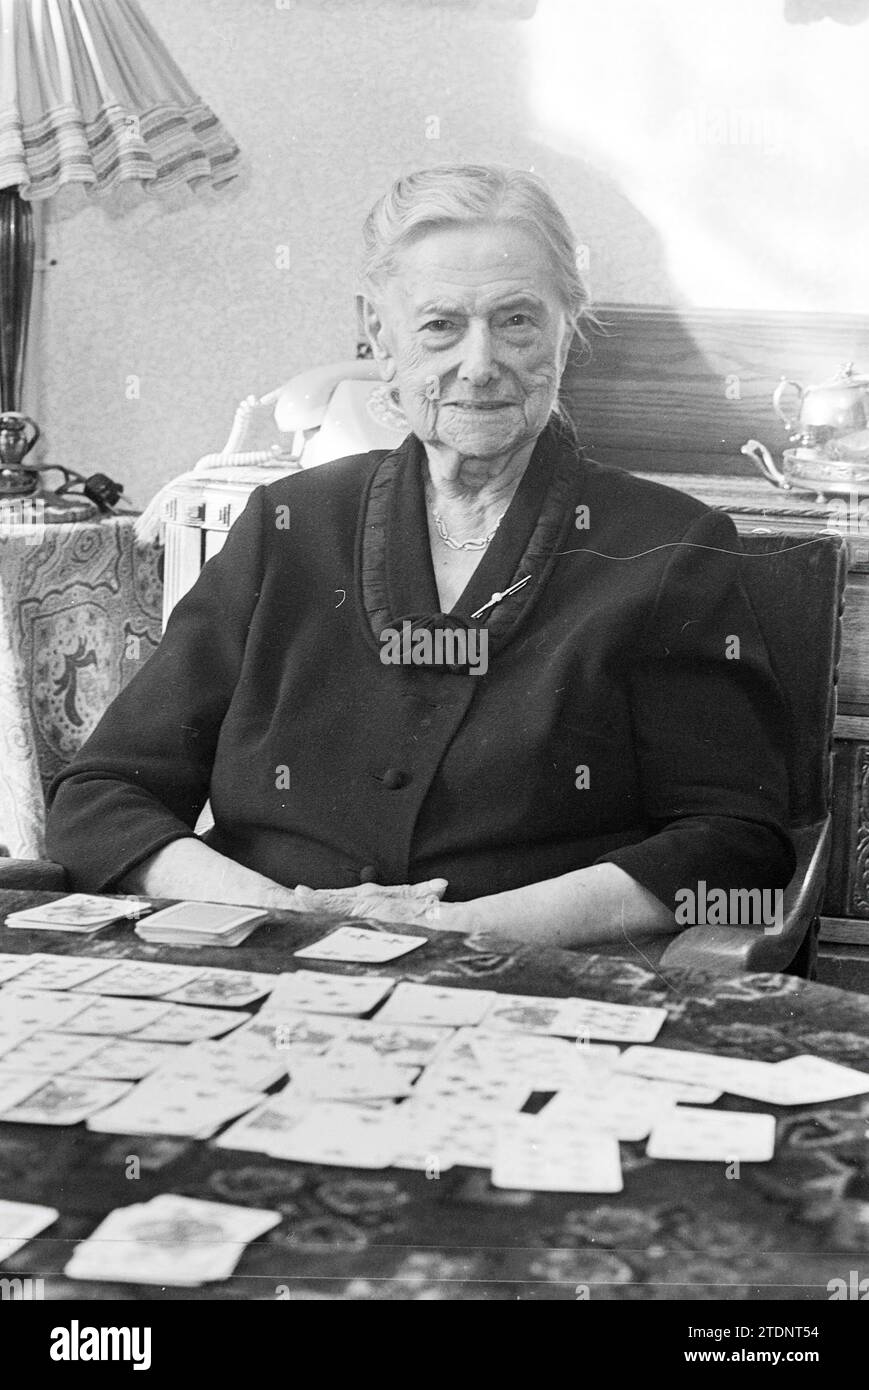 Portrait of 100 year old woman with playing cards on the table, 29-03-1972, Whizgle News from the Past, Tailored for the Future. Explore historical narratives, Dutch The Netherlands agency image with a modern perspective, bridging the gap between yesterday's events and tomorrow's insights. A timeless journey shaping the stories that shape our future Stock Photo